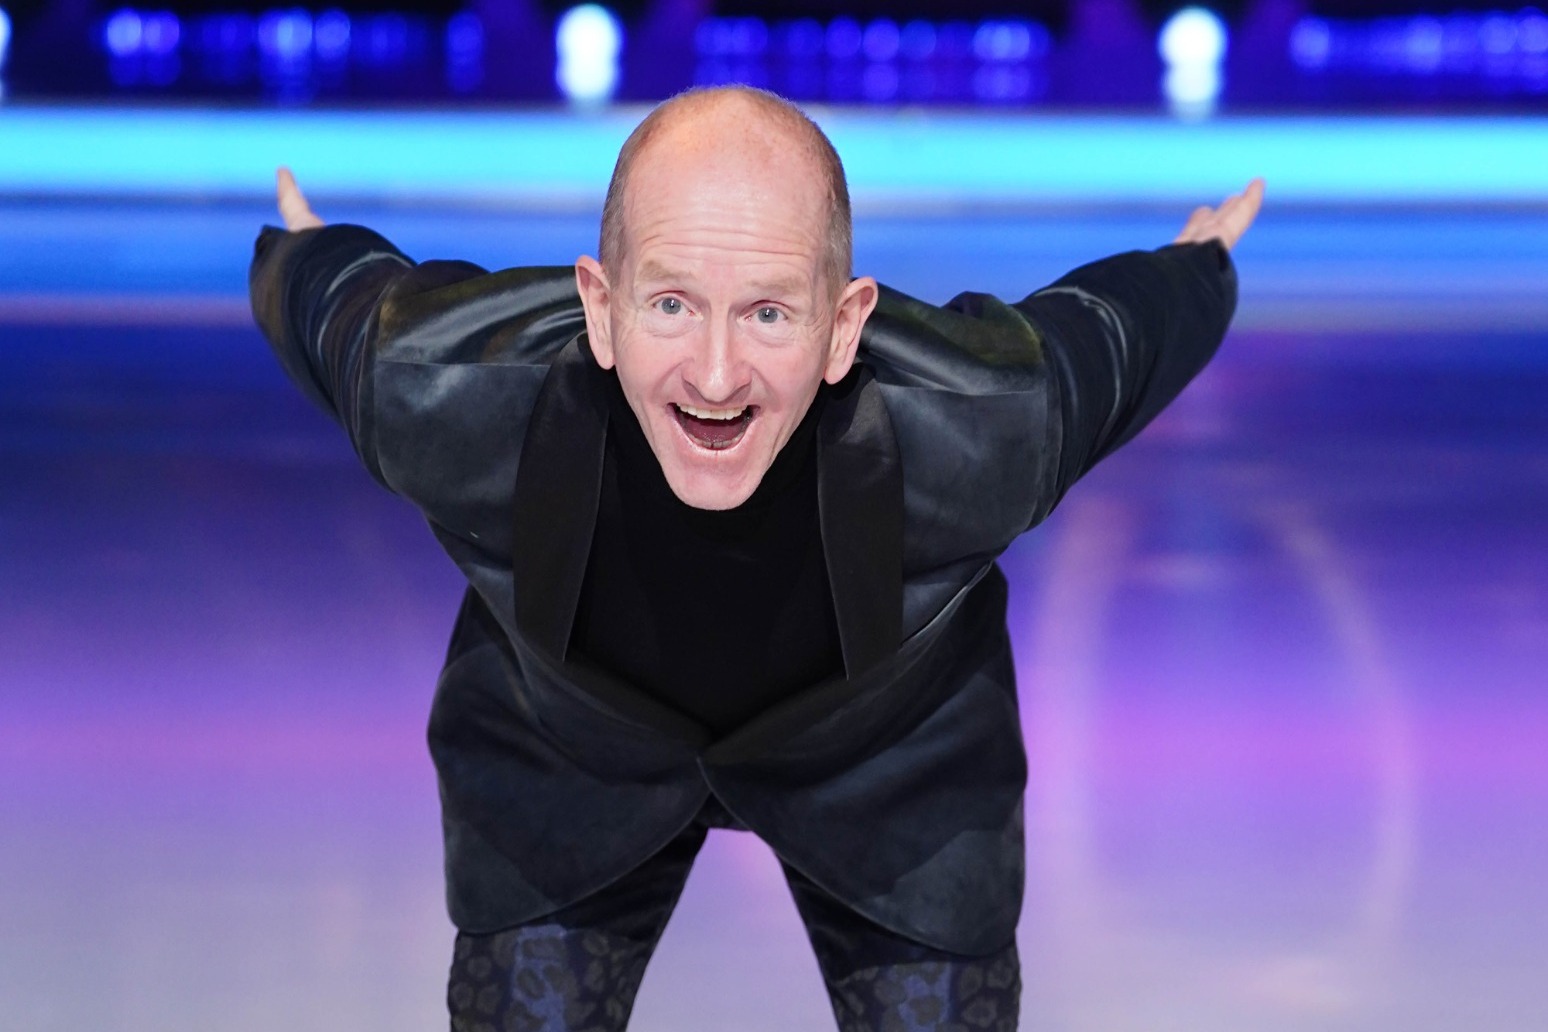 Eddie ‘The Eagle’ Edwards on Dancing On Ice: I thought I broke my elbow in fall 